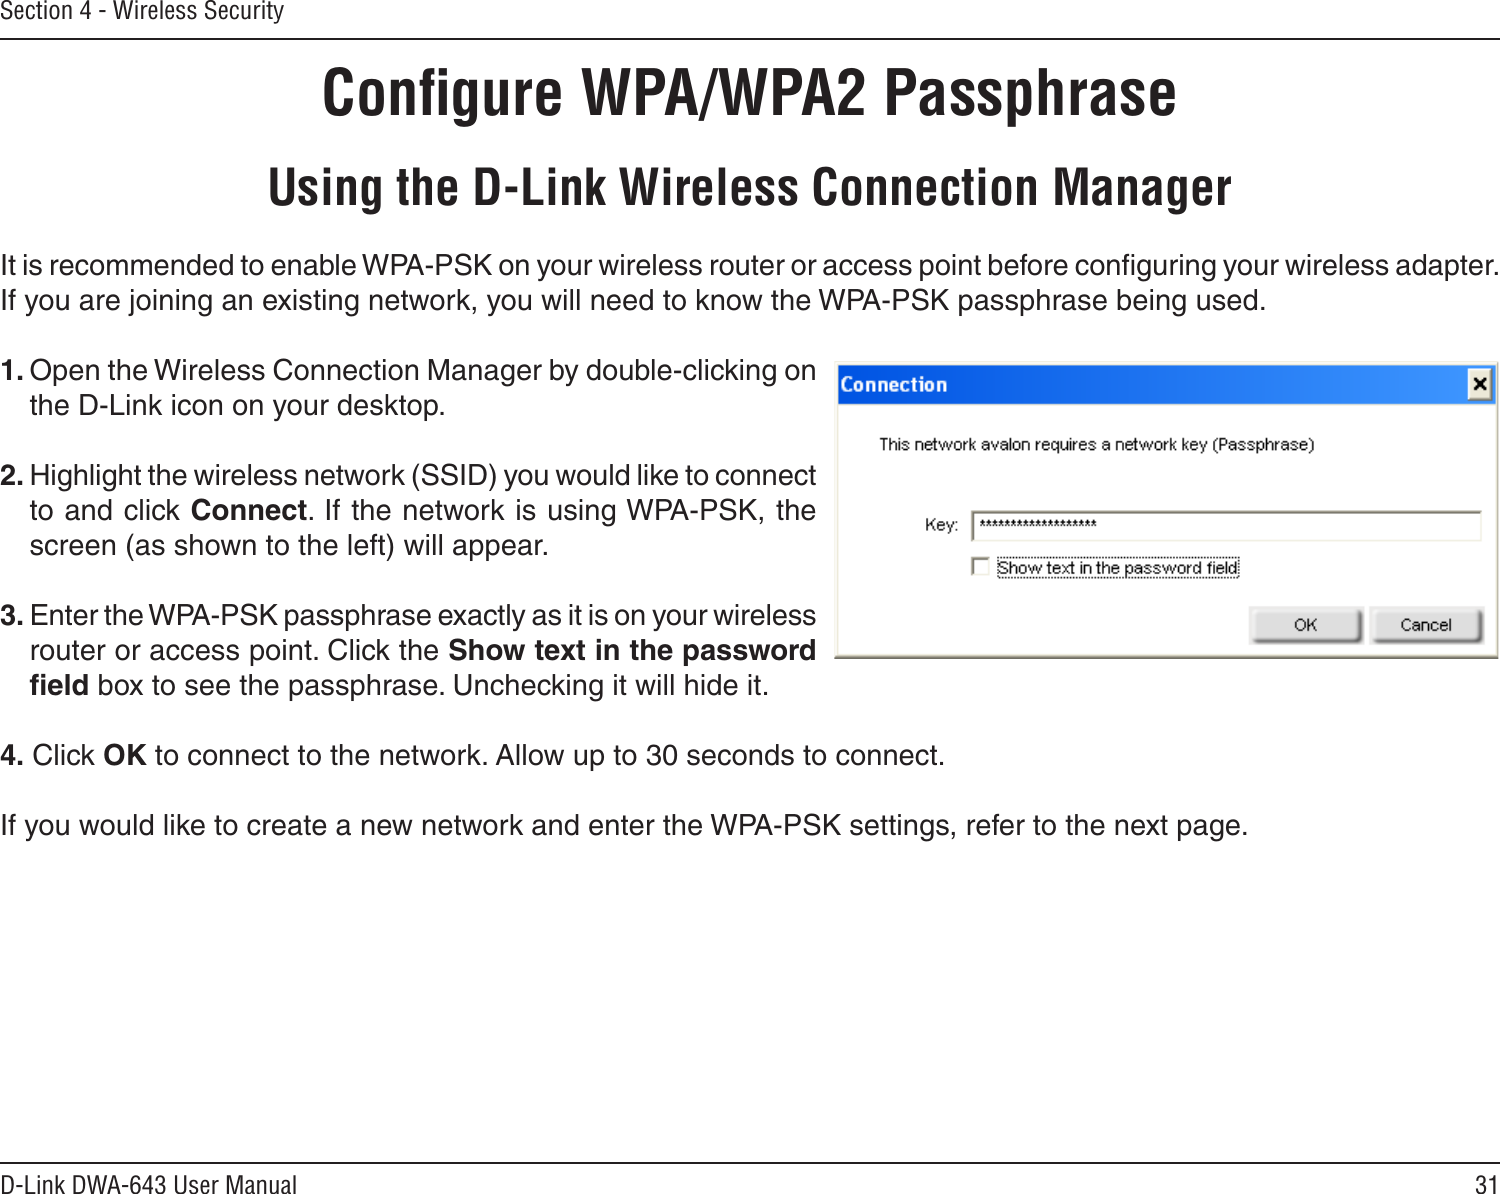 31D-Link DWA-643 User ManualSection 4 - Wireless SecurityConﬁgure WPA/WPA2 PassphraseUsing the D-Link Wireless Connection ManagerIt is recommended to enable WPA-PSK on your wireless router or access point before conﬁguring your wireless adapter. If you are joining an existing network, you will need to know the WPA-PSK passphrase being used.1. Open the Wireless Connection Manager by double-clicking on the D-Link icon on your desktop. 2. Highlight the wireless network (SSID) you would like to connect to and click Connect. If the network is using WPA-PSK, the screen (as shown to the left) will appear. 3. Enter the WPA-PSK passphrase exactly as it is on your wireless router or access point. Click the Show text in the password ﬁeld box to see the passphrase. Unchecking it will hide it.4. Click OK to connect to the network. Allow up to 30 seconds to connect.If you would like to create a new network and enter the WPA-PSK settings, refer to the next page.